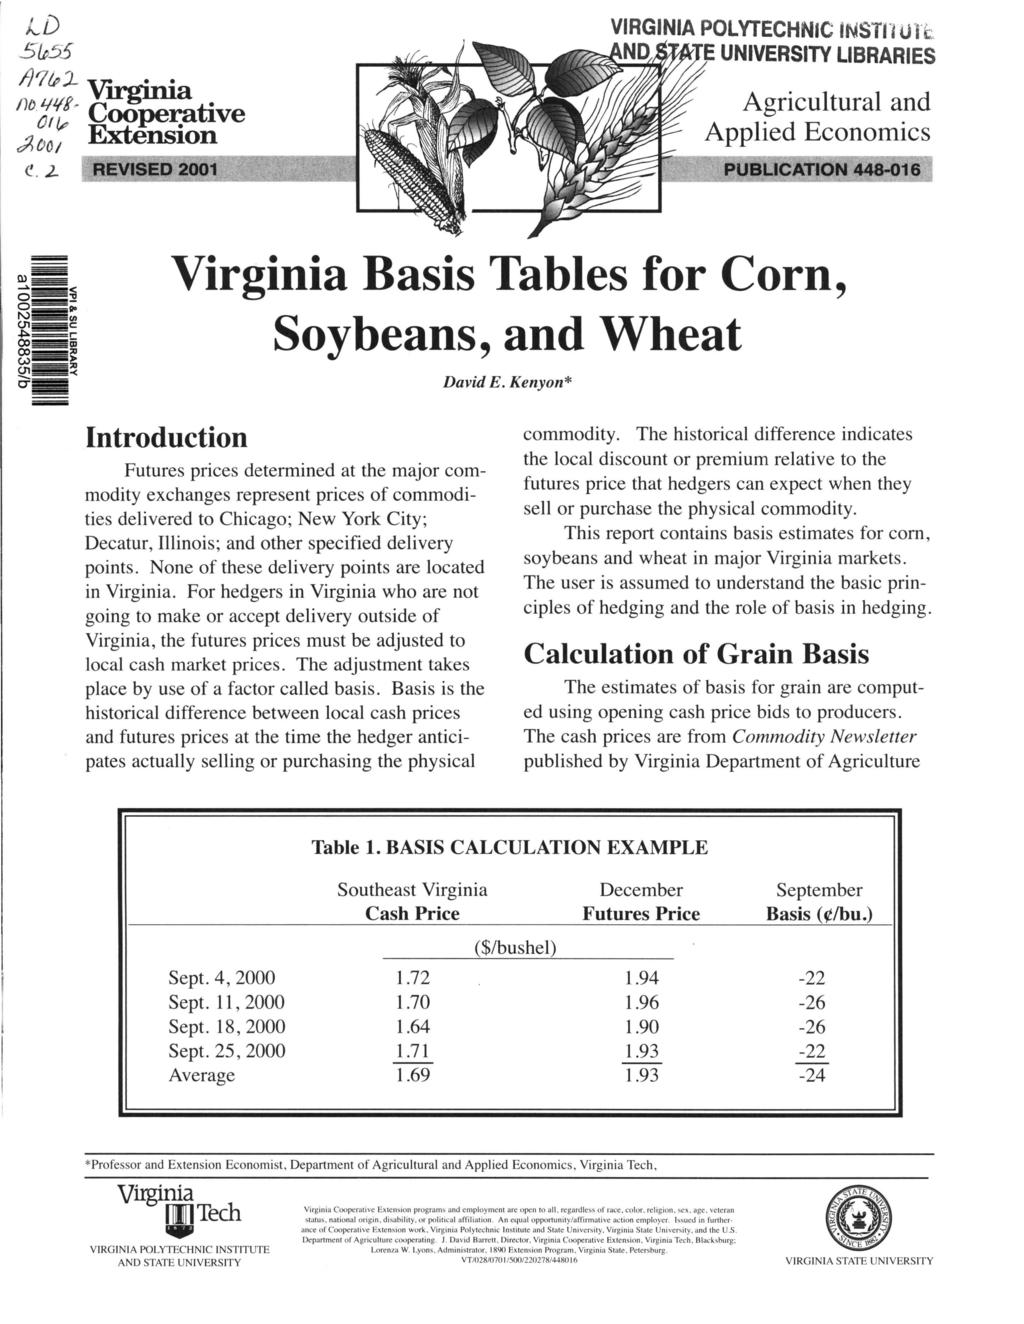 VIRGINIA POL VTECHNIC INSTn U 11~. UNIVERSITY LIBRARIES Agricultural and Applied Economics Virginia Basis Tables for Corn, Soybeans, and Wheat David E.